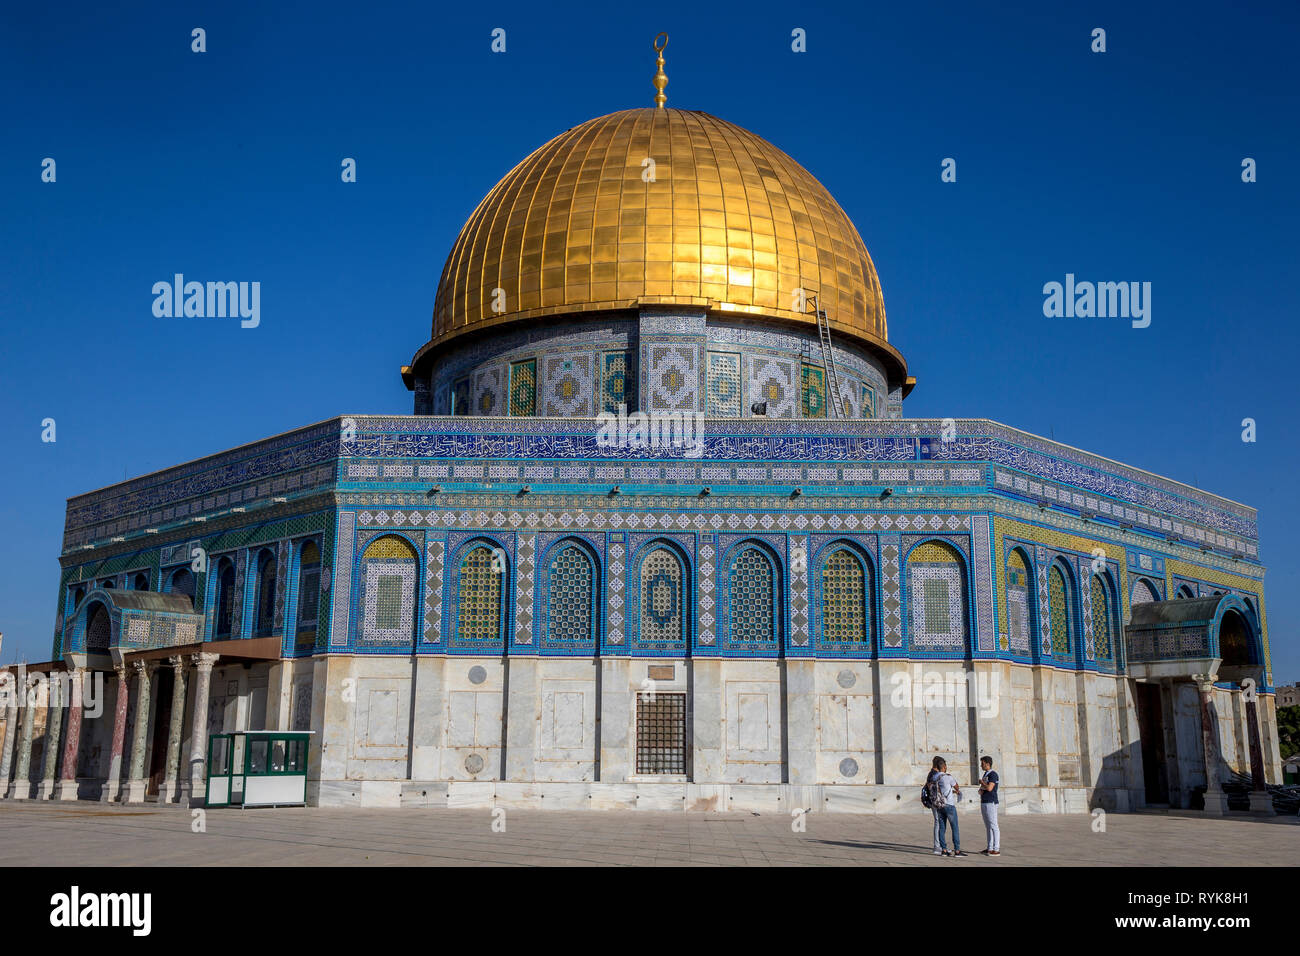 Dome of the Rock, East Jerusalem, Israel. Stock Photo